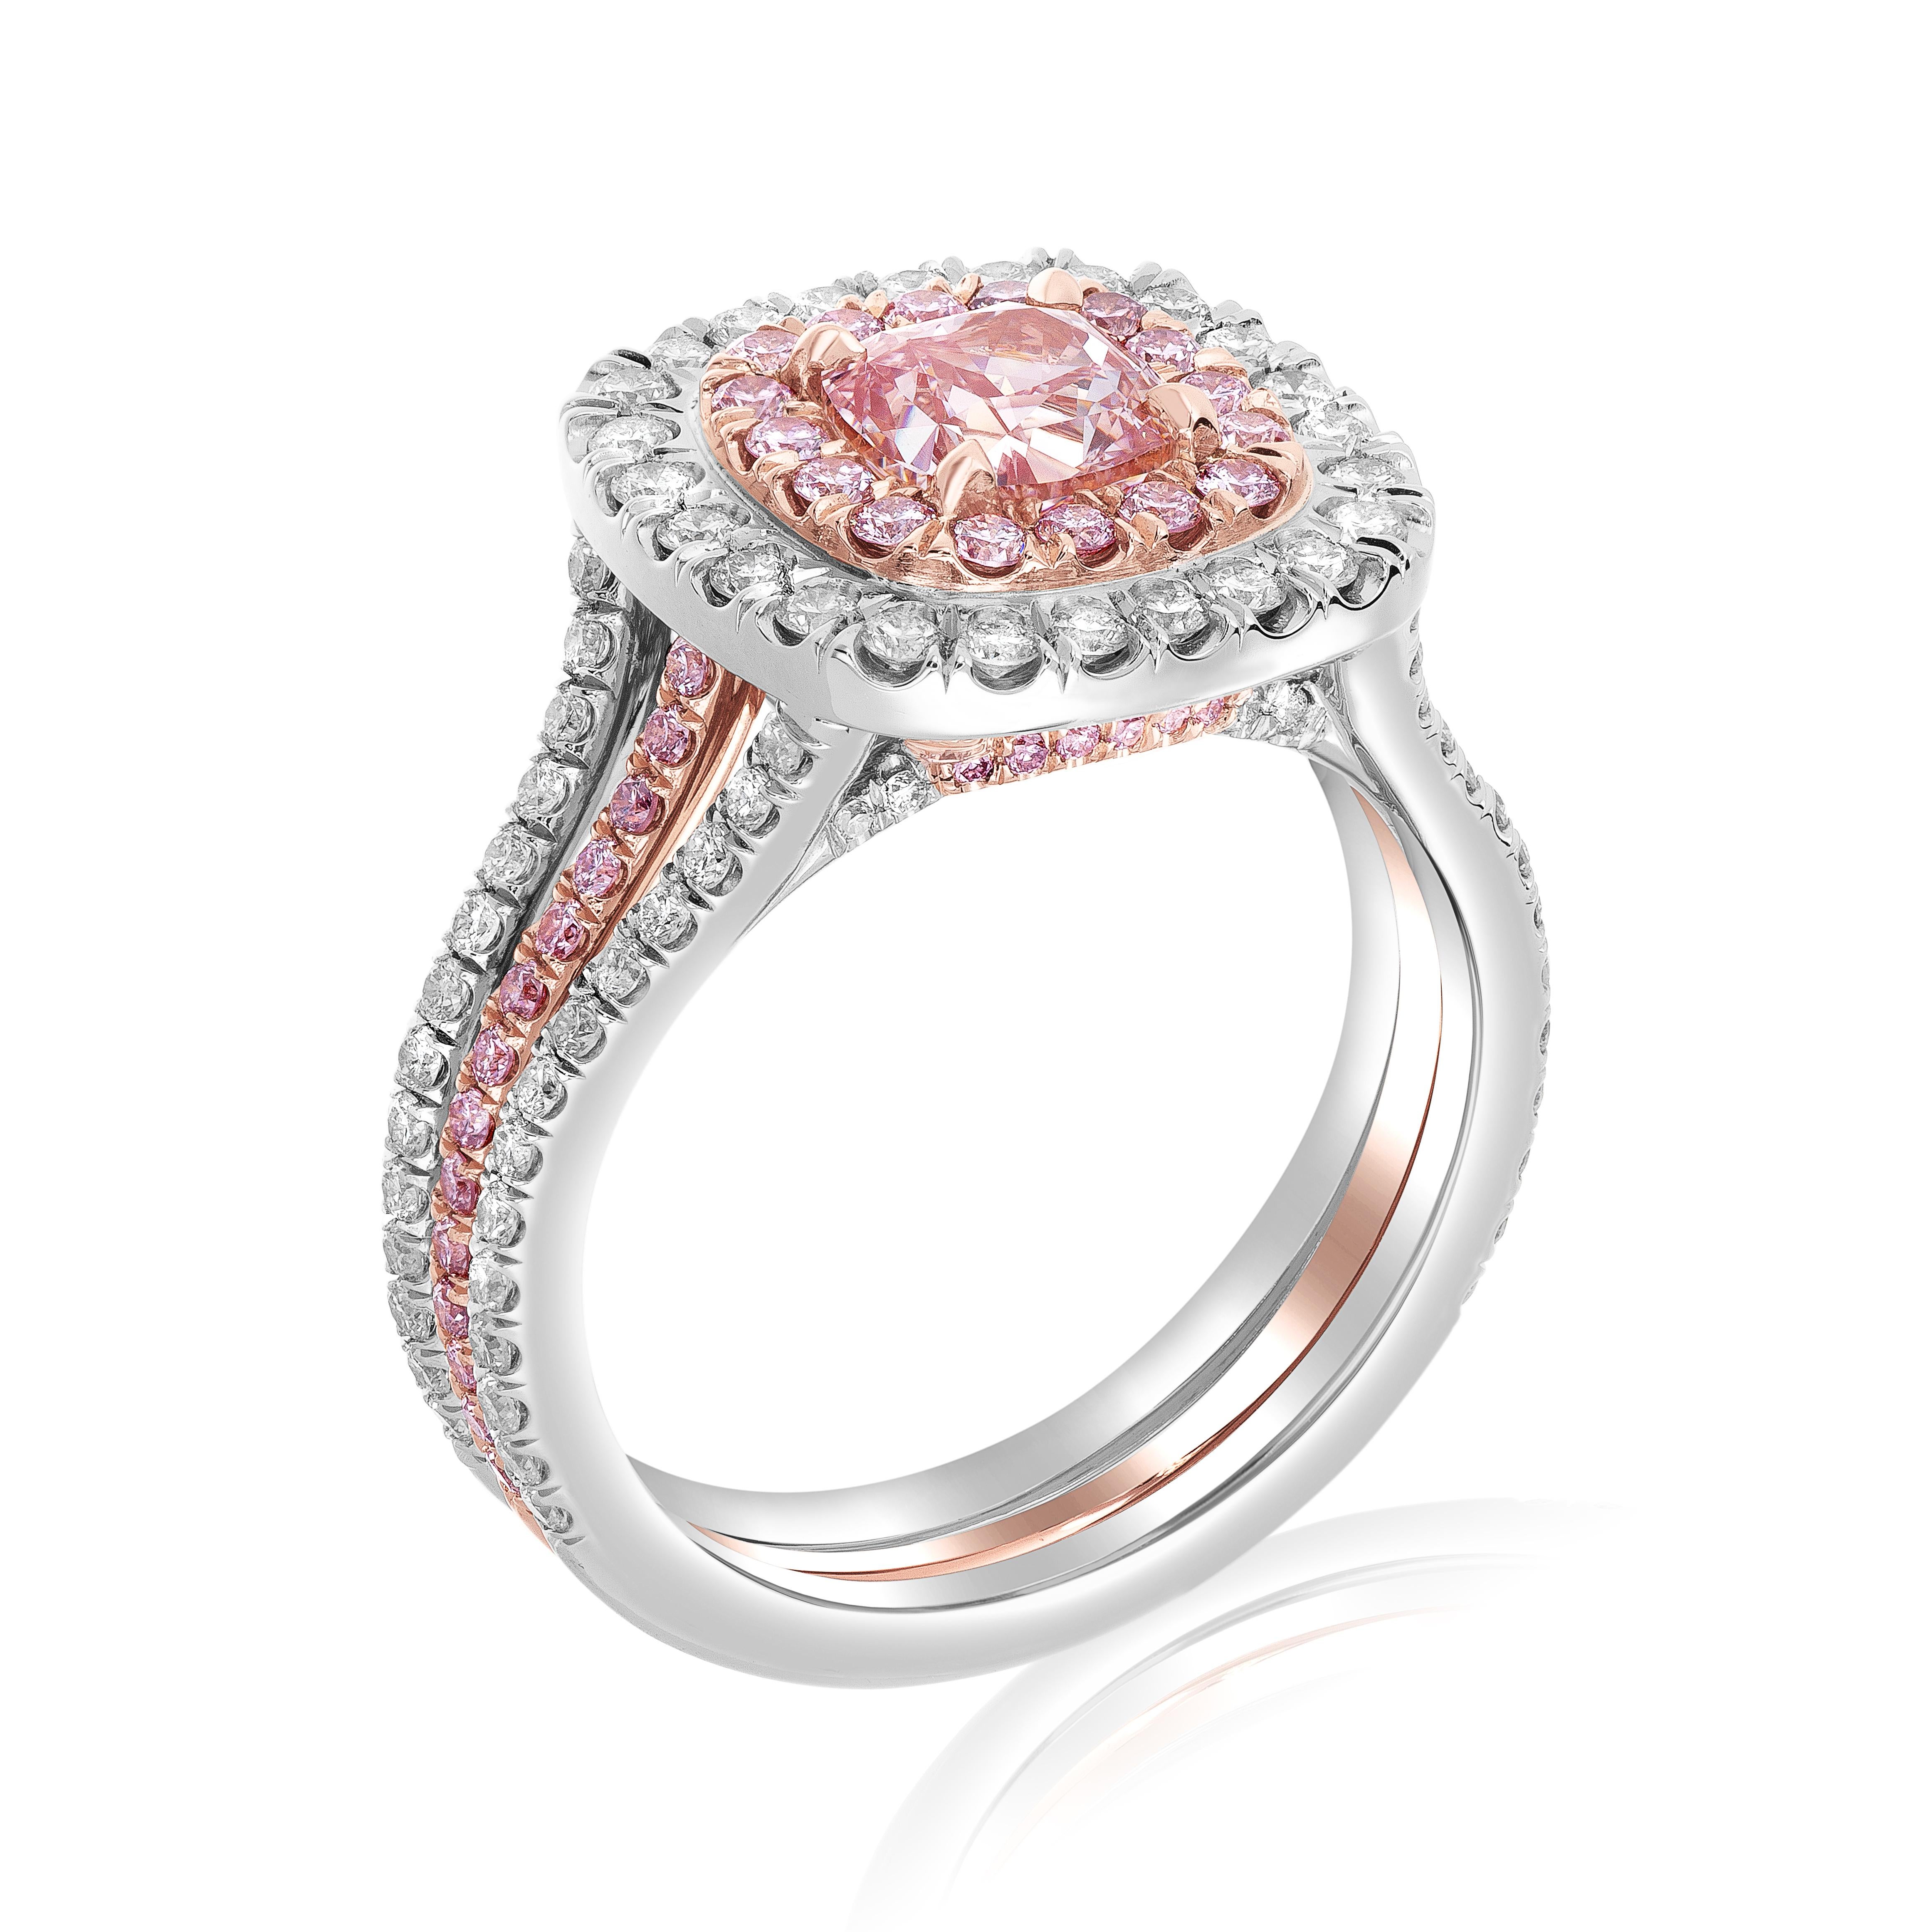 Add some unique flair to your jewelry collection with this handmade fancy orangy pink cushion ring! This one-of-a-kind ring features a beautiful 1.05 carat cushion, VS2, certified by the esteemed GIA with a unique number of 6214484372. The cushion